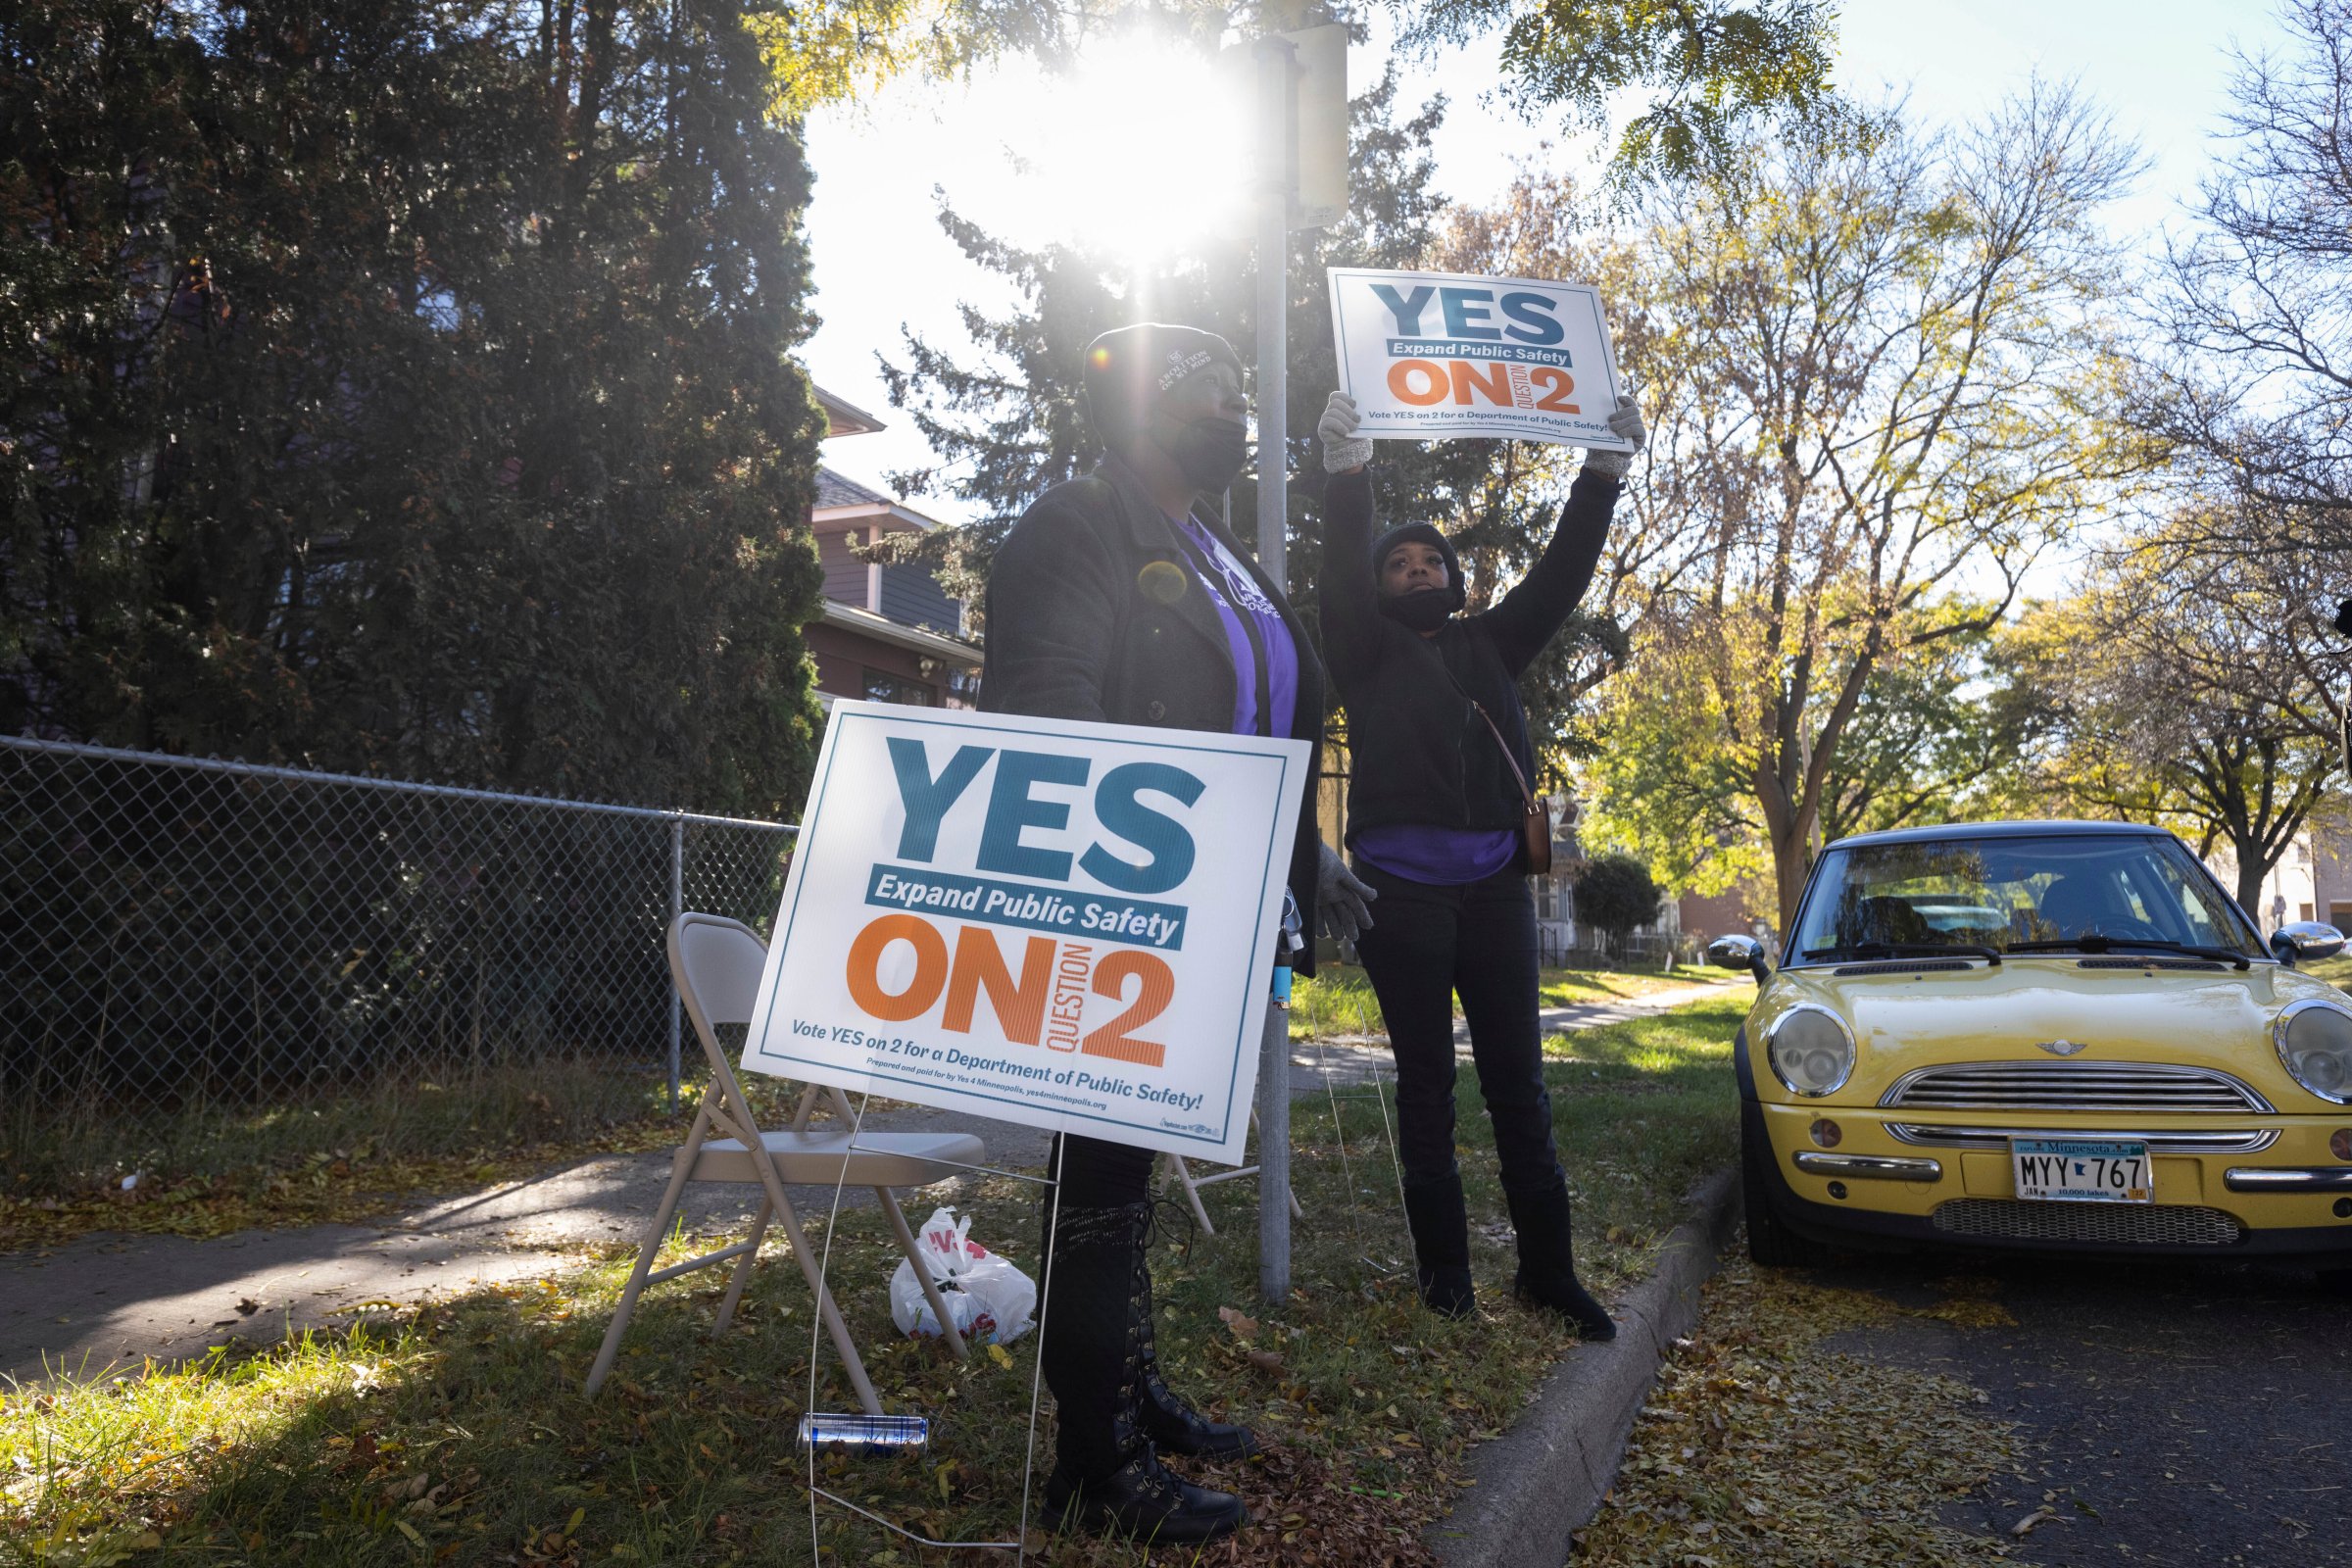 Volunteers urge community members to vote yes on ballot question two outside of a polling place on Tuesday, Nov. 2, 2021 in Minneapolis.